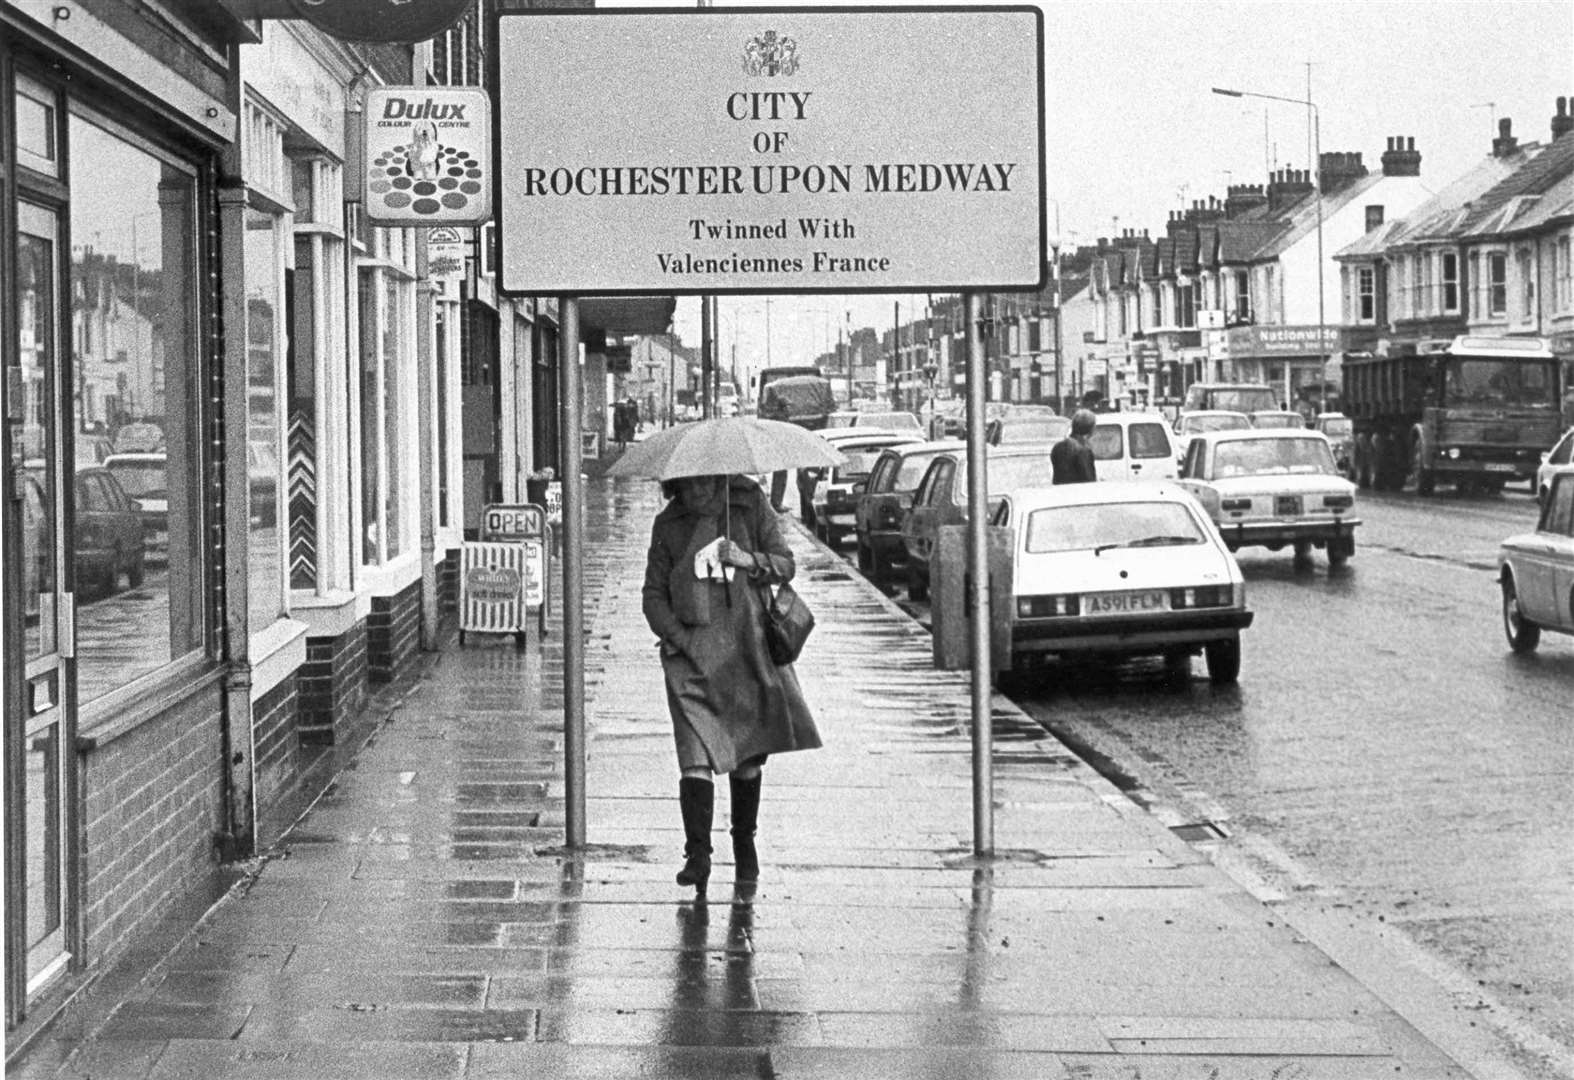 This sign on the A2 Chatham/Gillingham boundary in 1984 provoked complaints from locals. It replaced a sign simply saying 'Chatham' and people said it made visitors think they were driving straight into Rochester